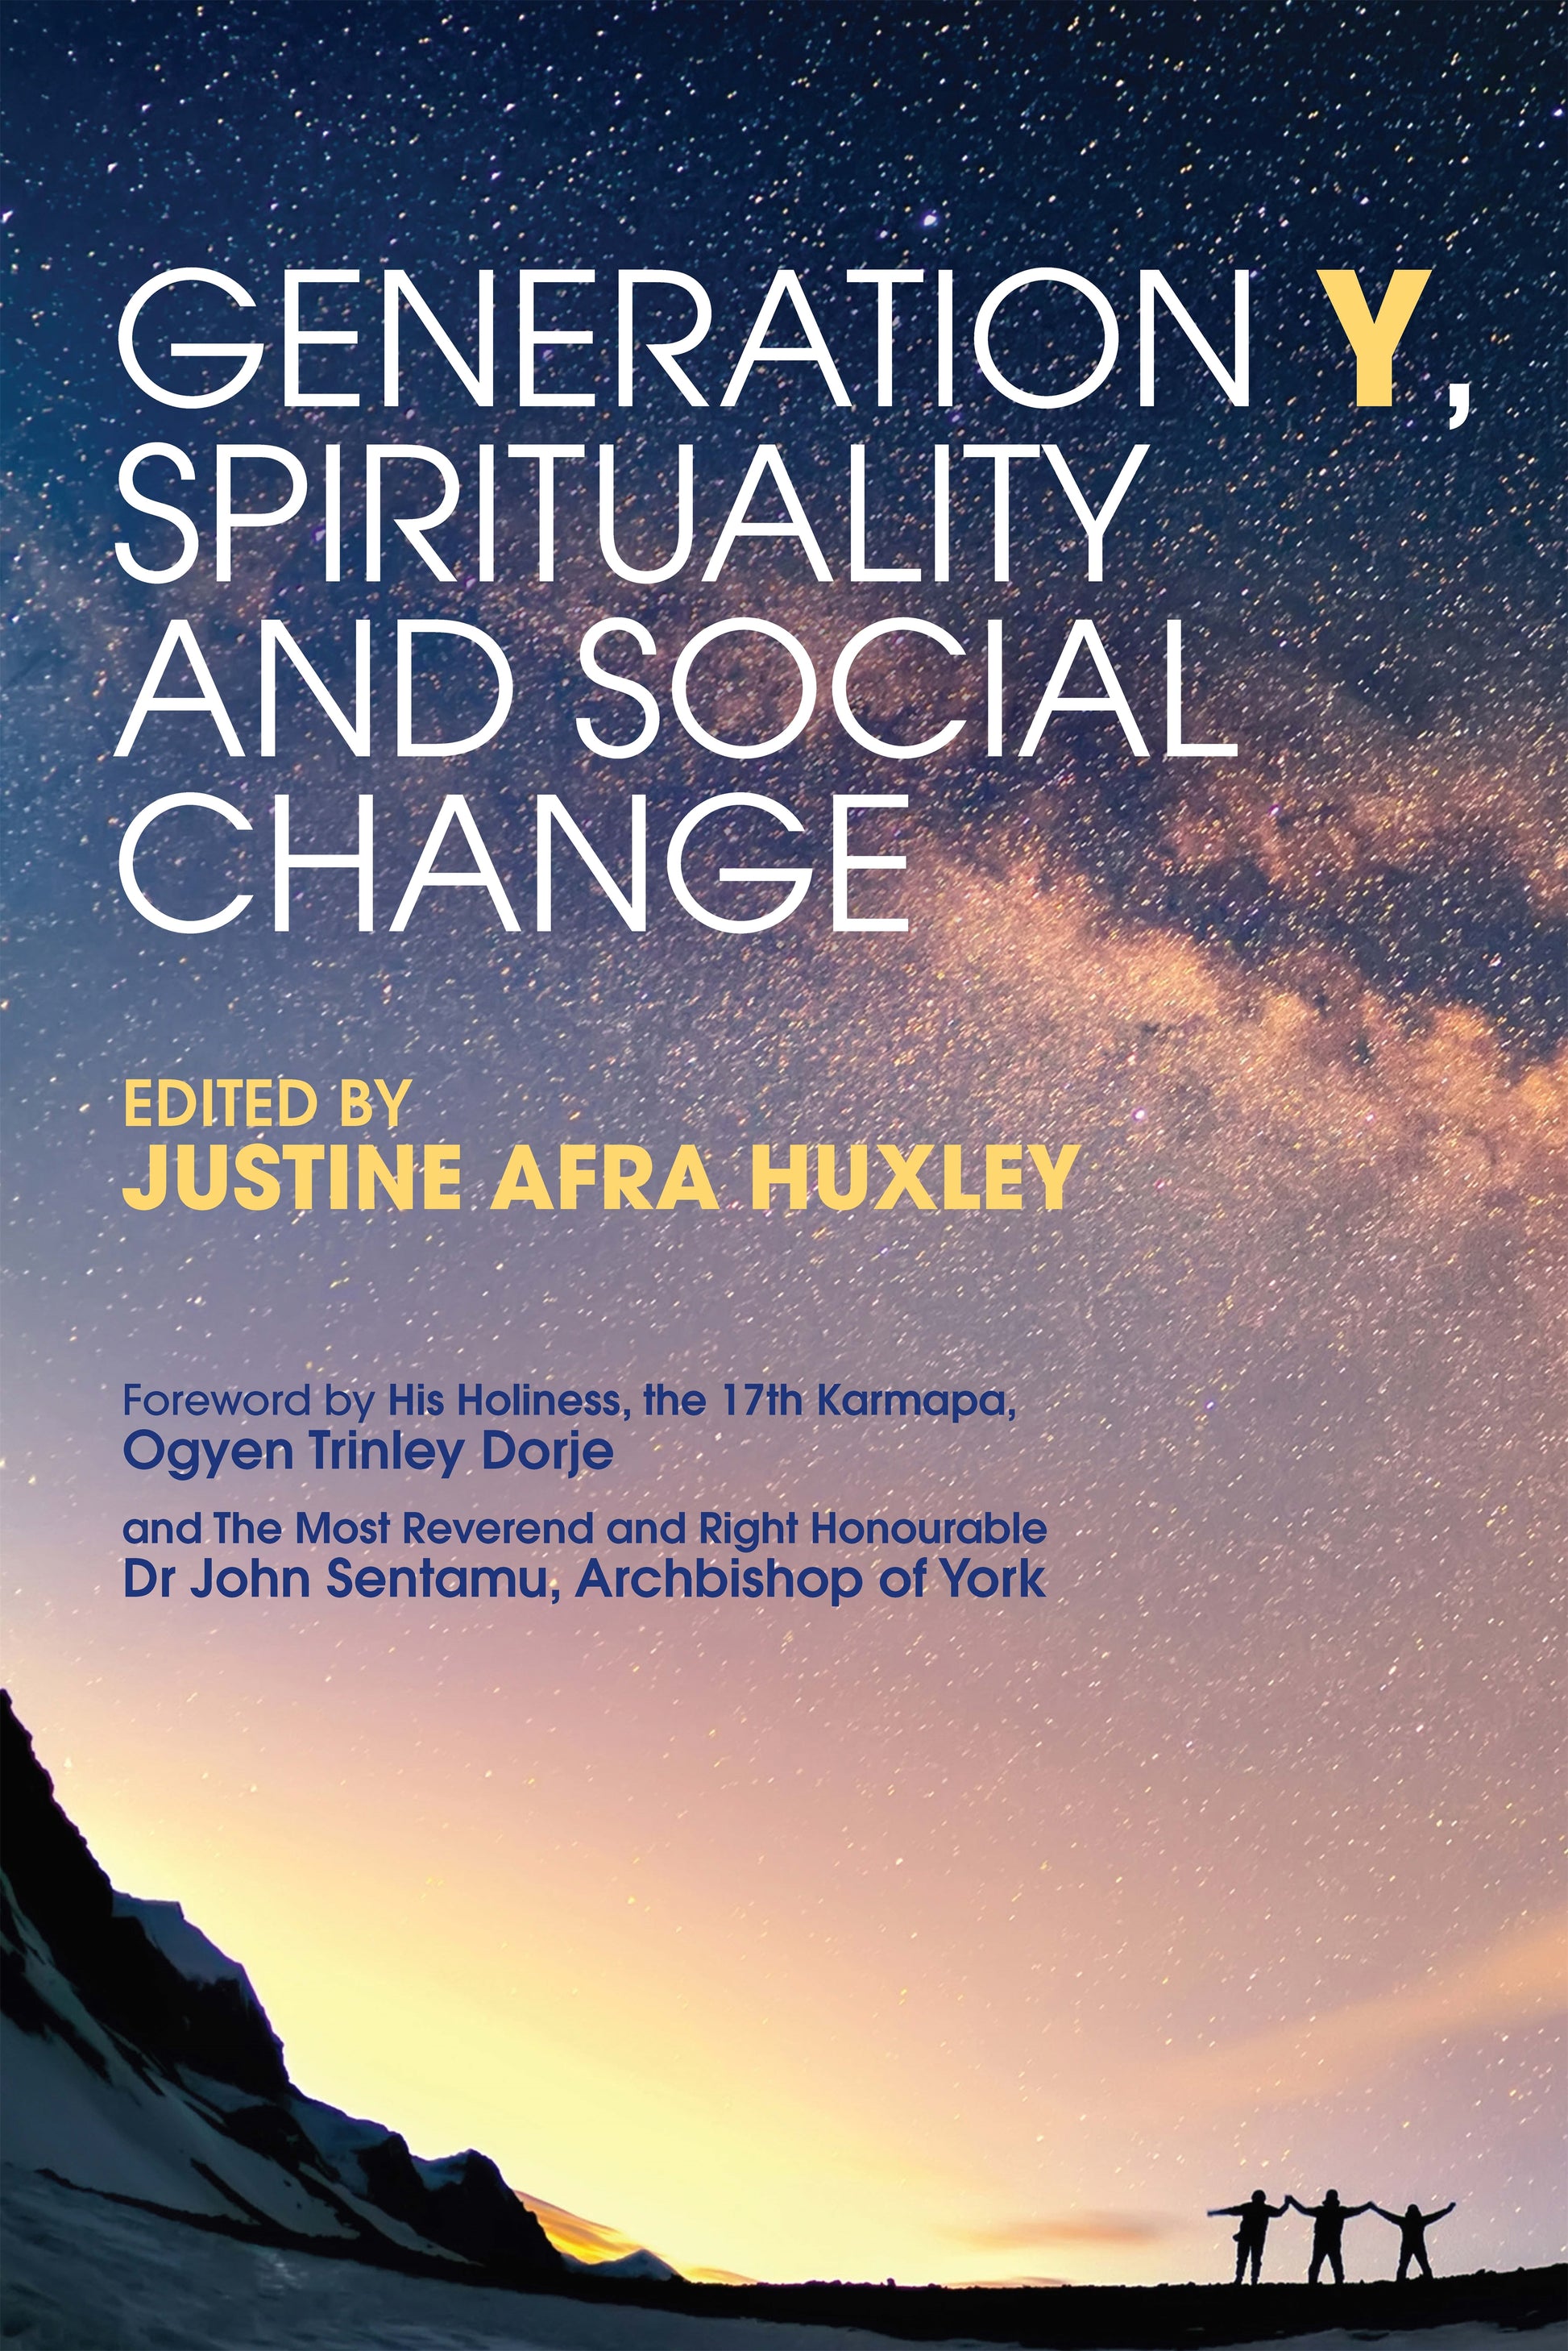 Generation Y, Spirituality and Social Change by Justine Afra Huxley, No Author Listed